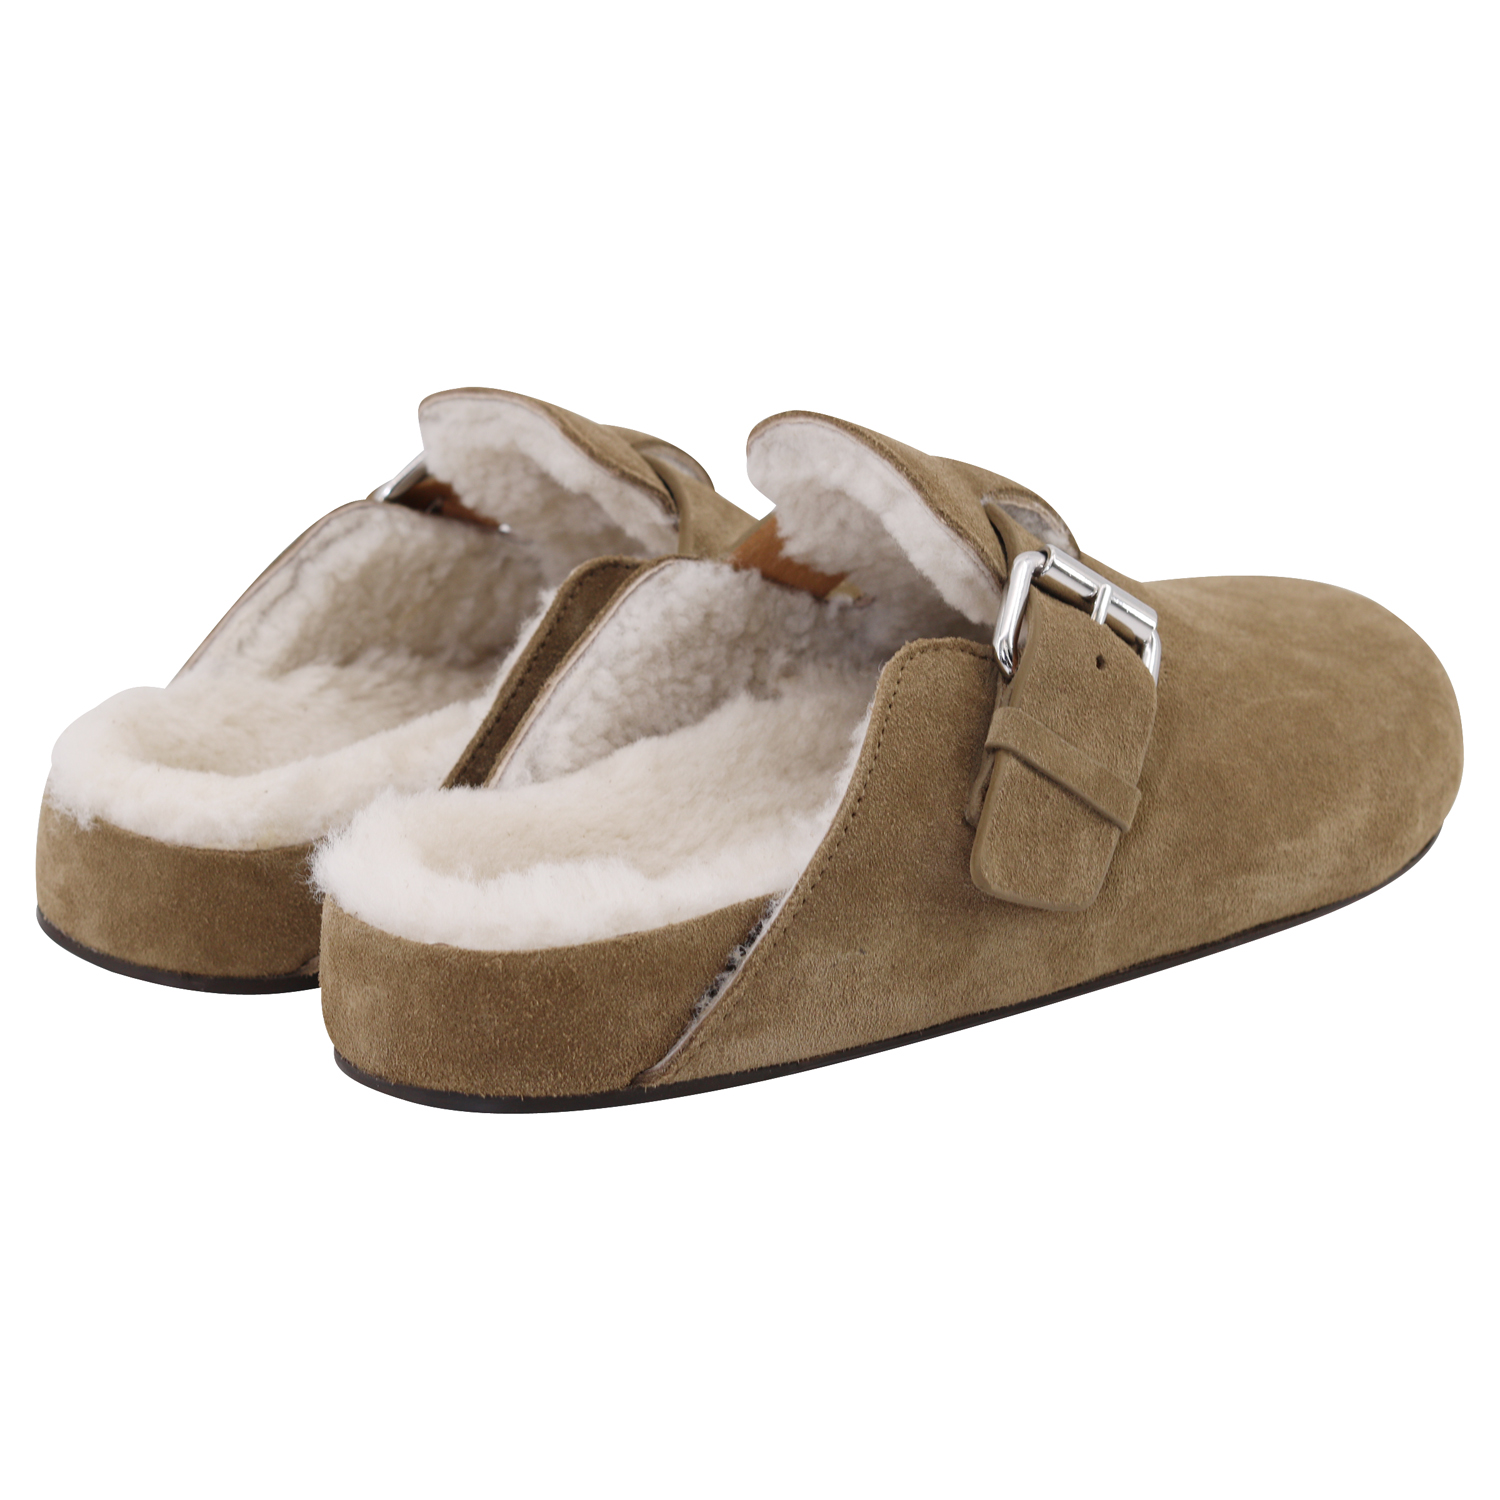 Isabel Marant Shearling Sandals Mirvin Taupe Suede 38